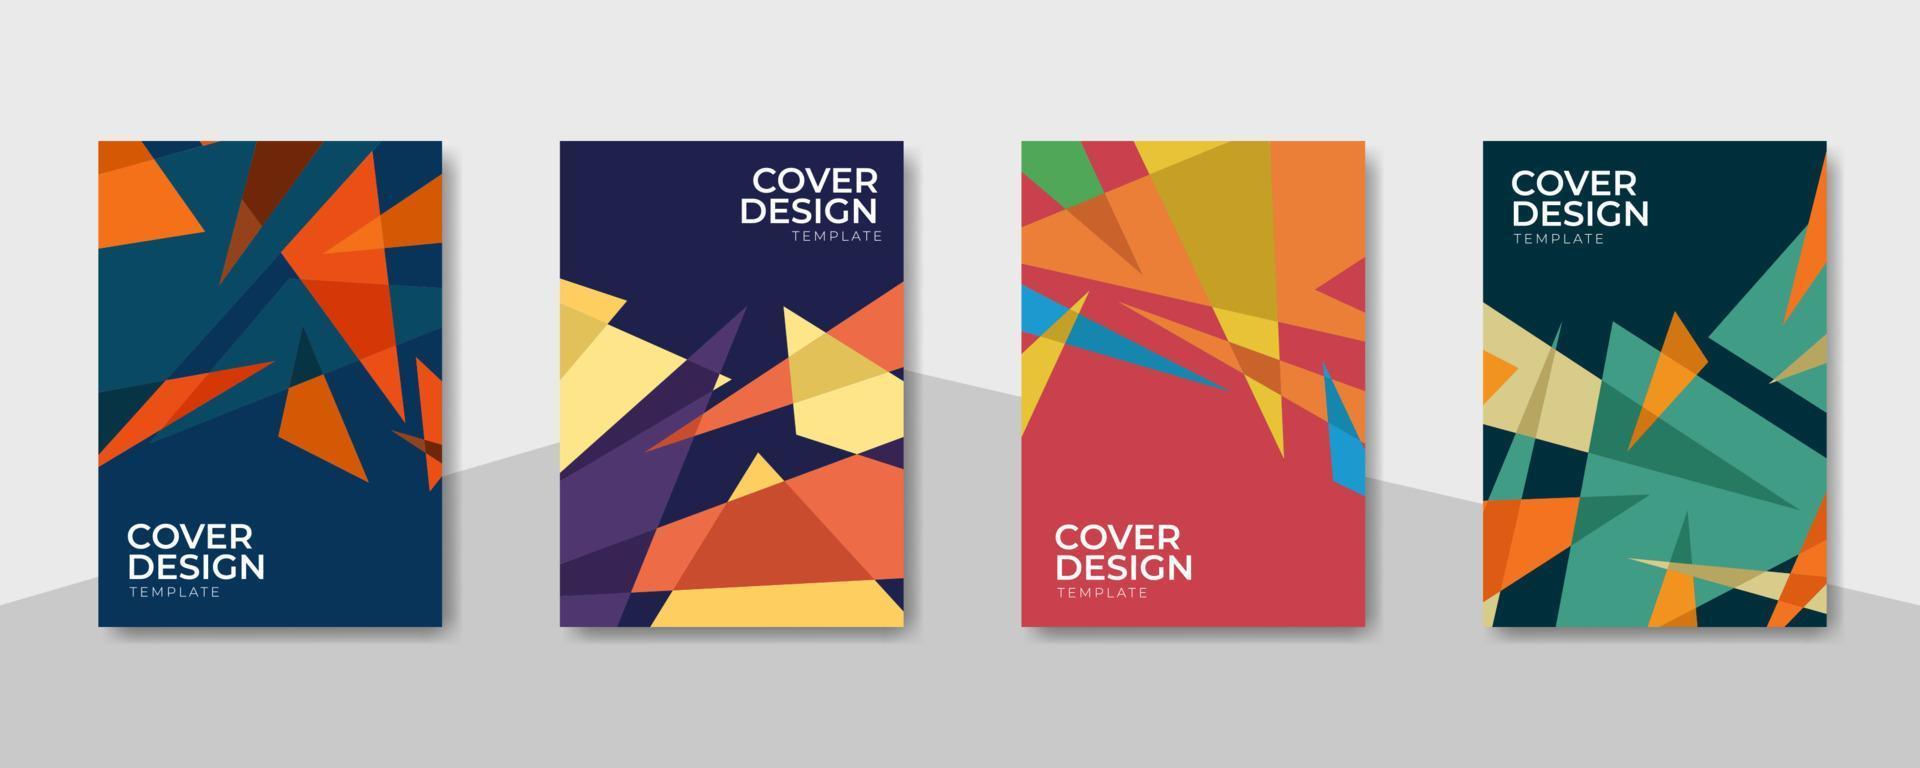 Cover design template with colorful abstract geometric low poly designs vector